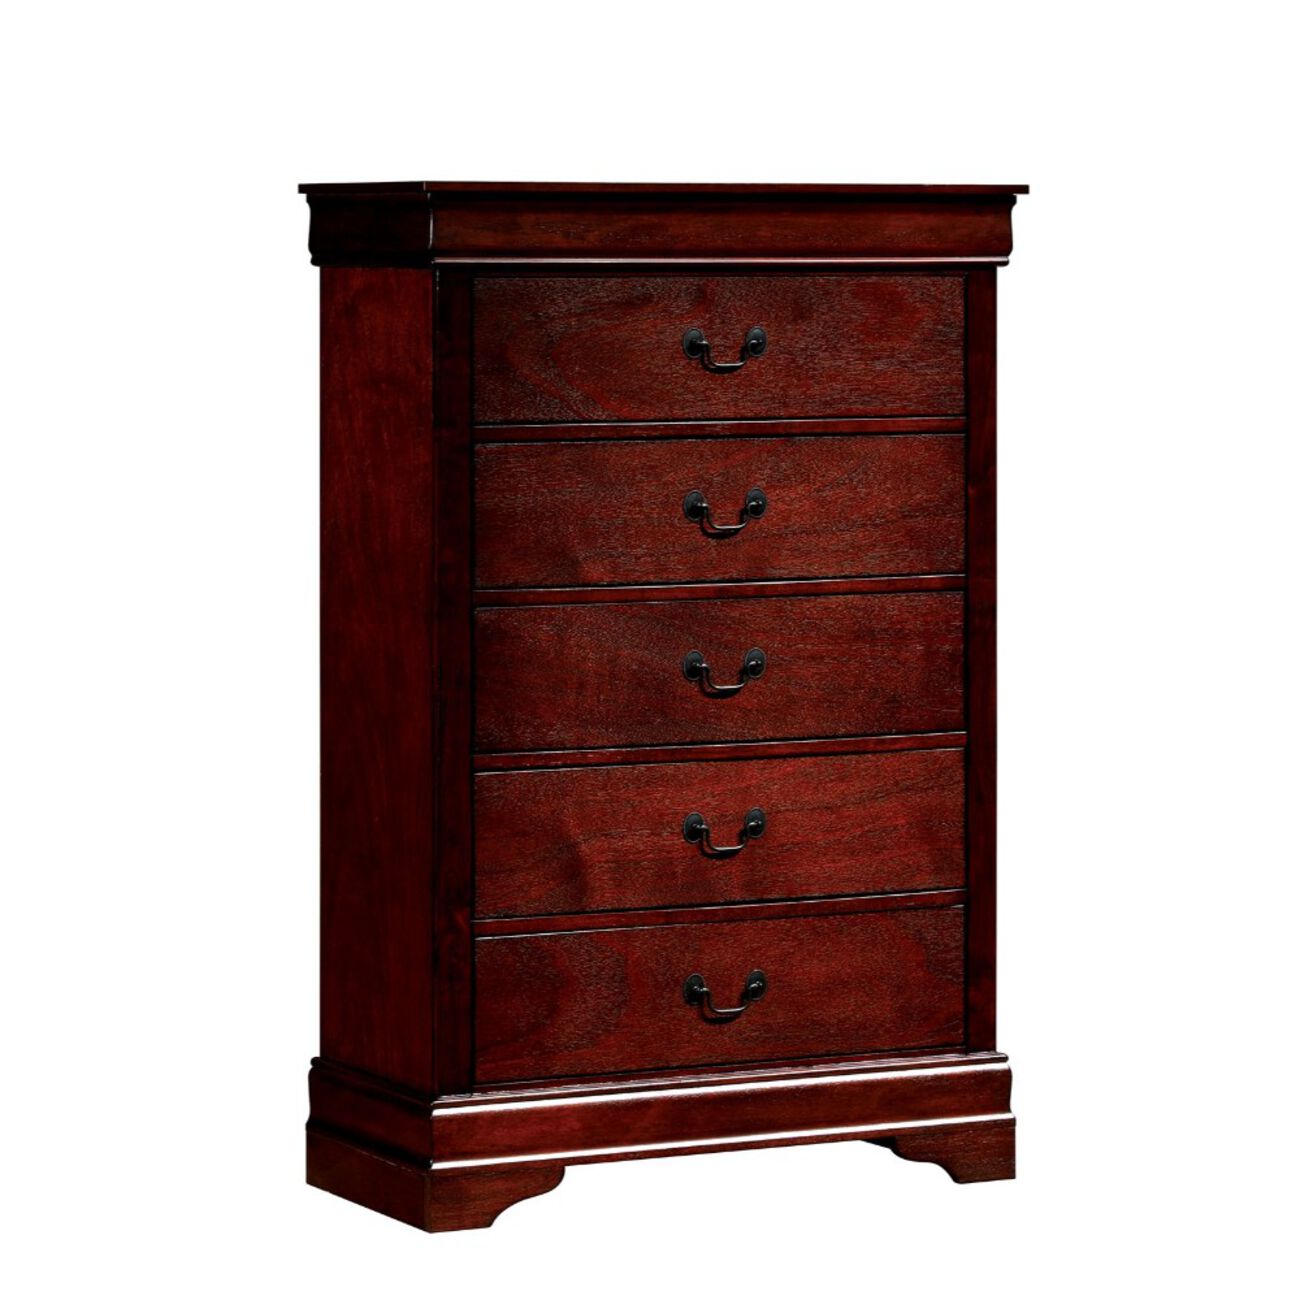 Traditionally Designed Wooden Chest, Cherry Brown